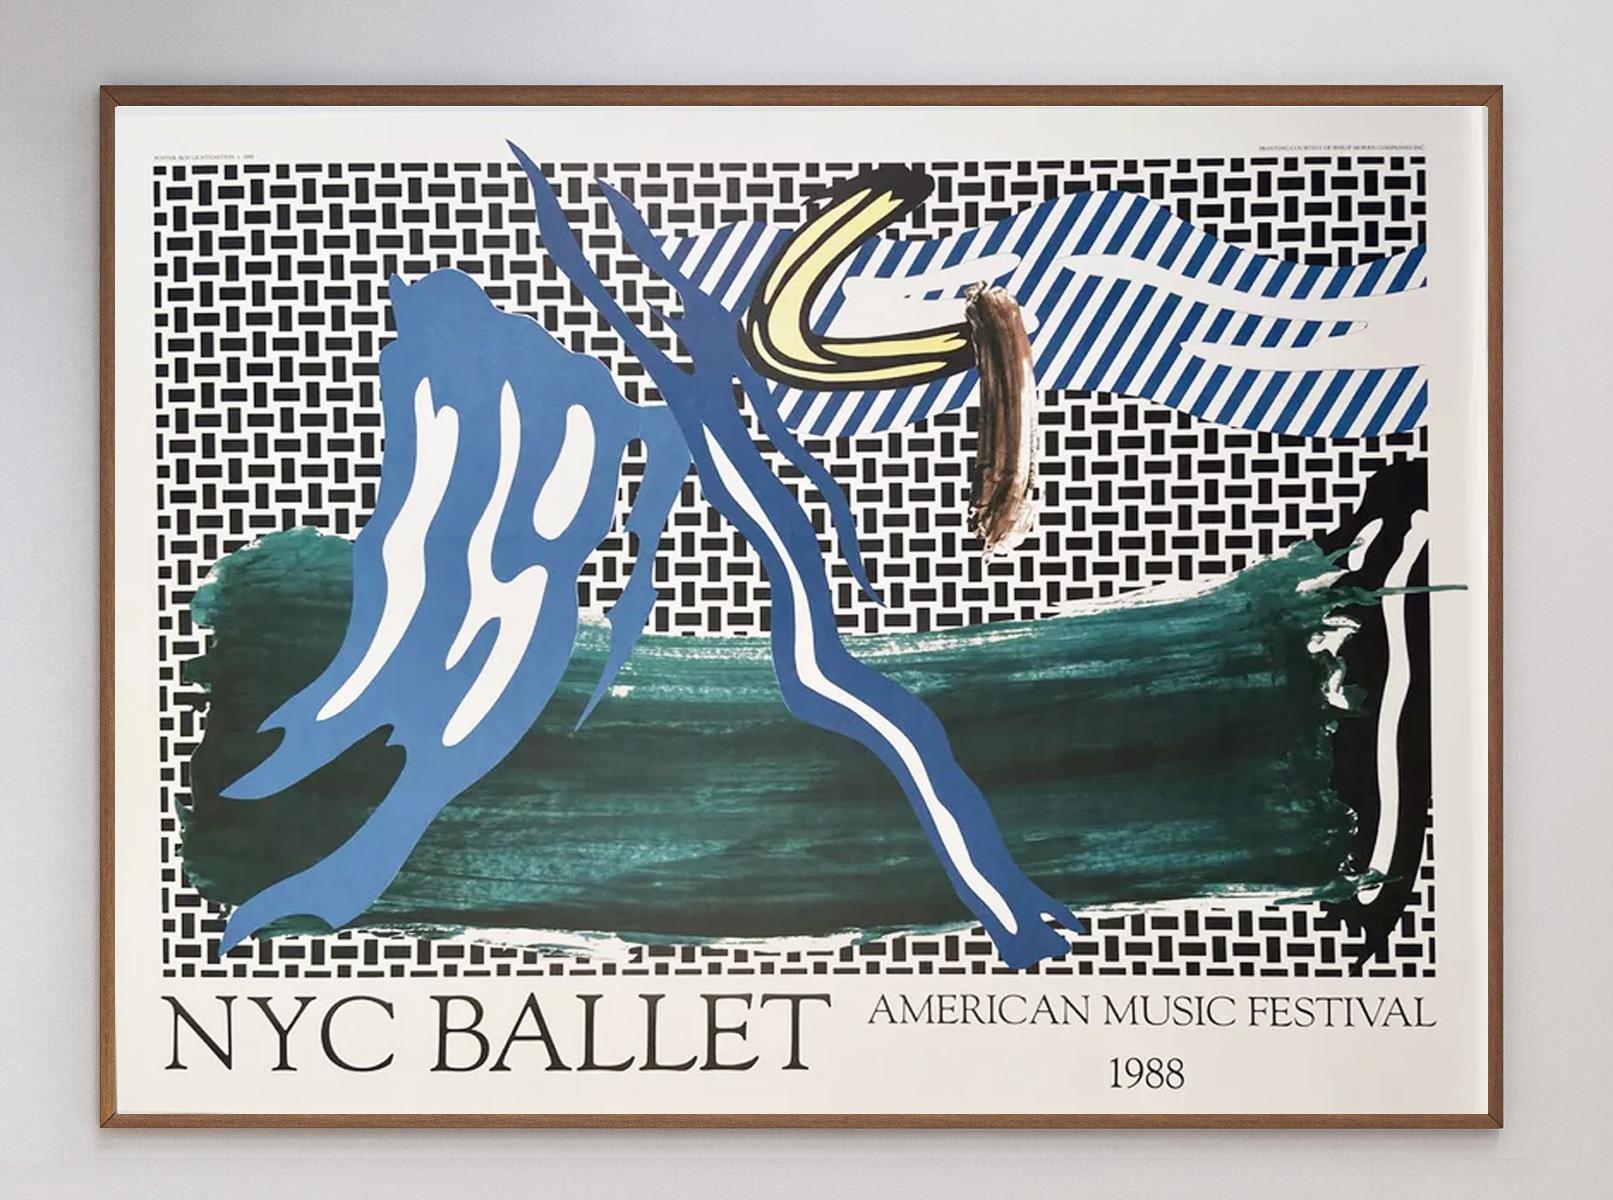 This stunning rare design was created for the 1988 American Music Festival, celebrating the 40th anniversary of the New York City Ballet. Featuring typically bold colours and thick lines, this is an excellent piece of Pop Art and Roy Lichtenstein